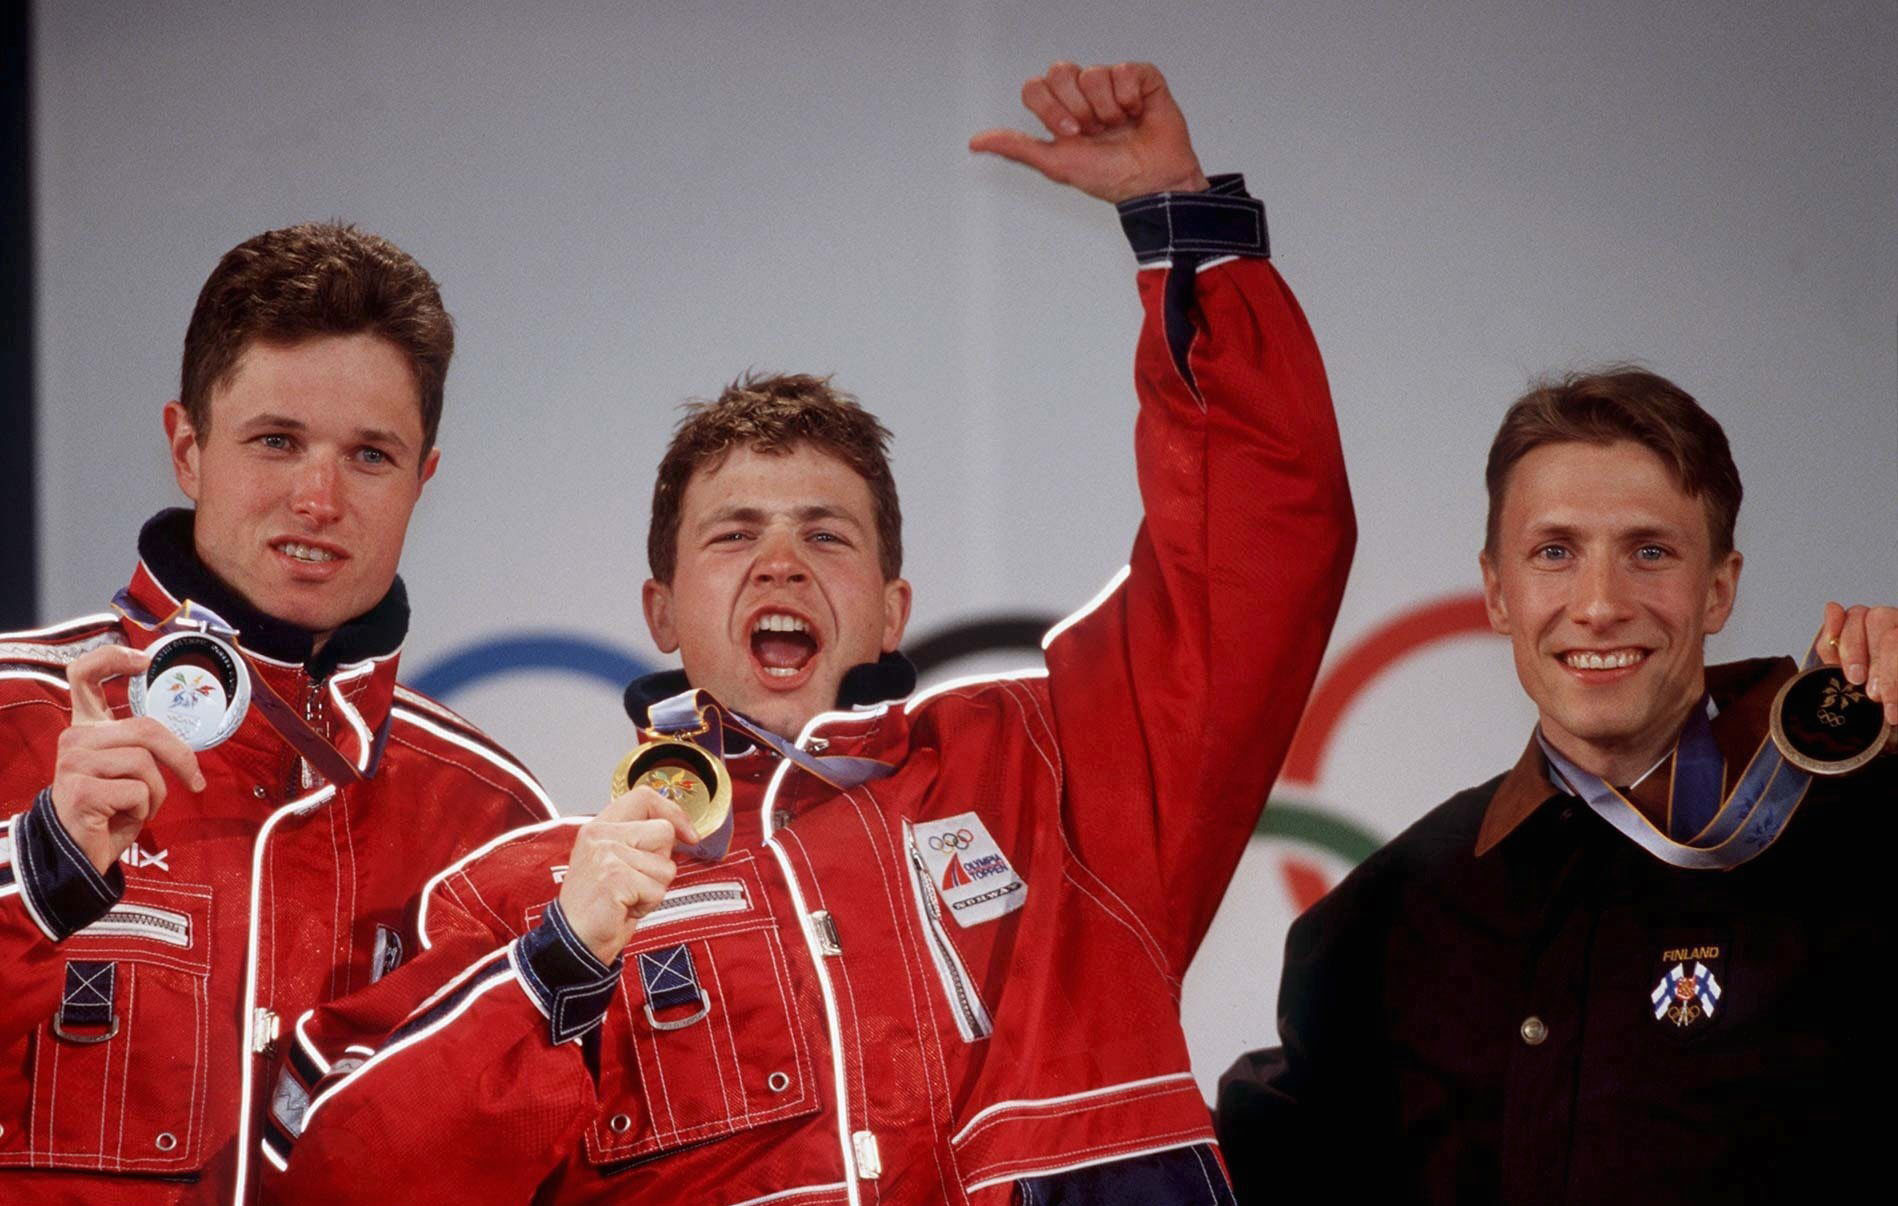 Ole Einar Bjørndalen won his first Olympic gold medal at Nagano 1998 ©Getty Images 